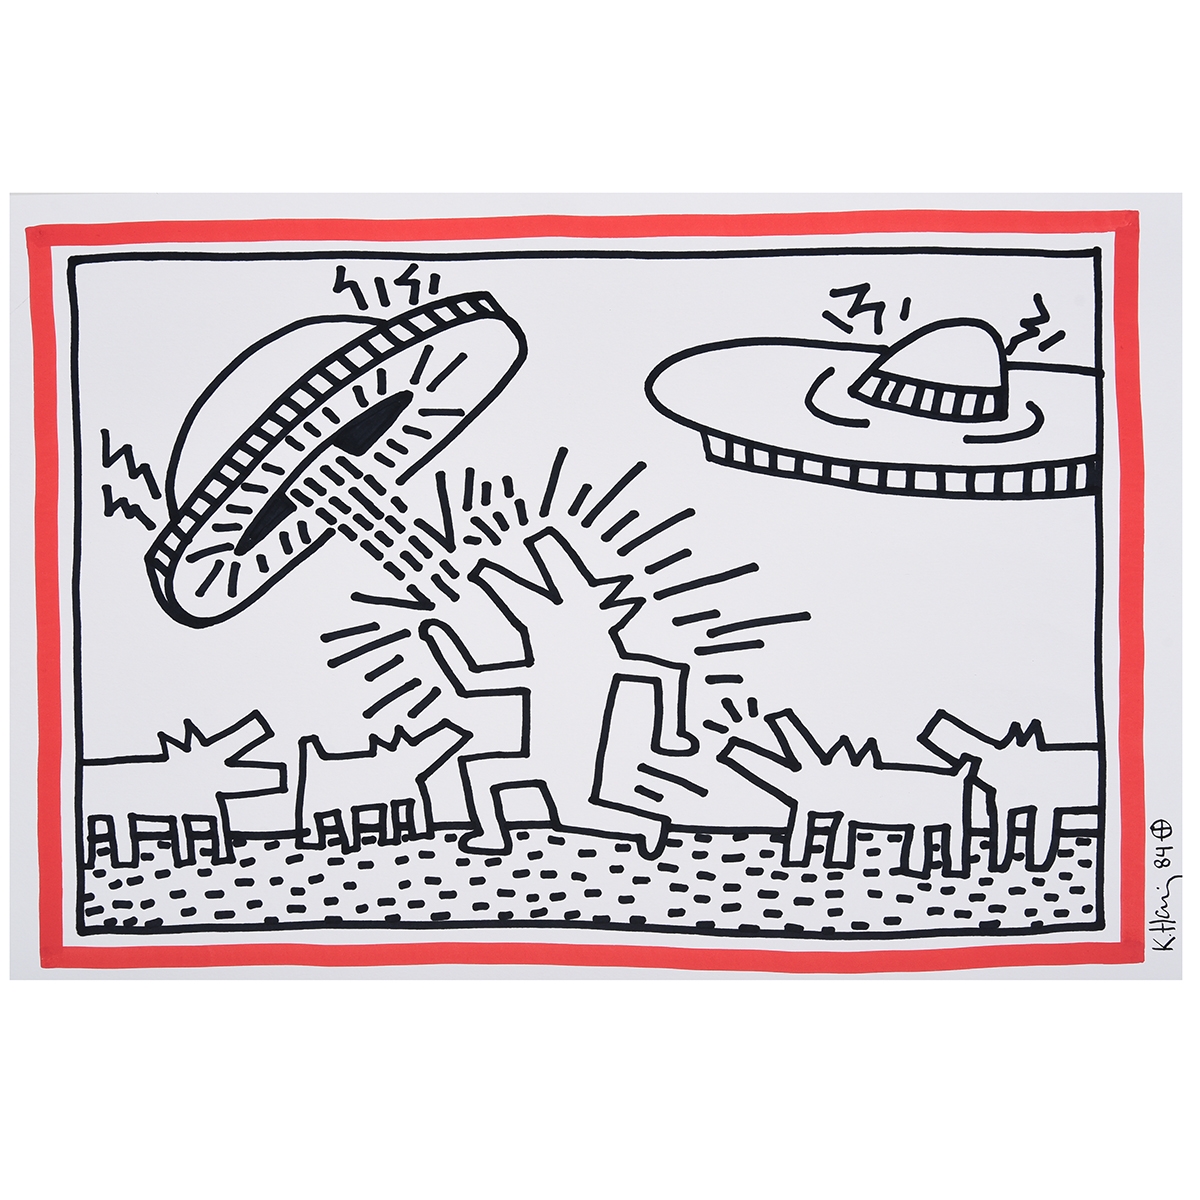 Barking Dog and Spaceship by Keith Haring